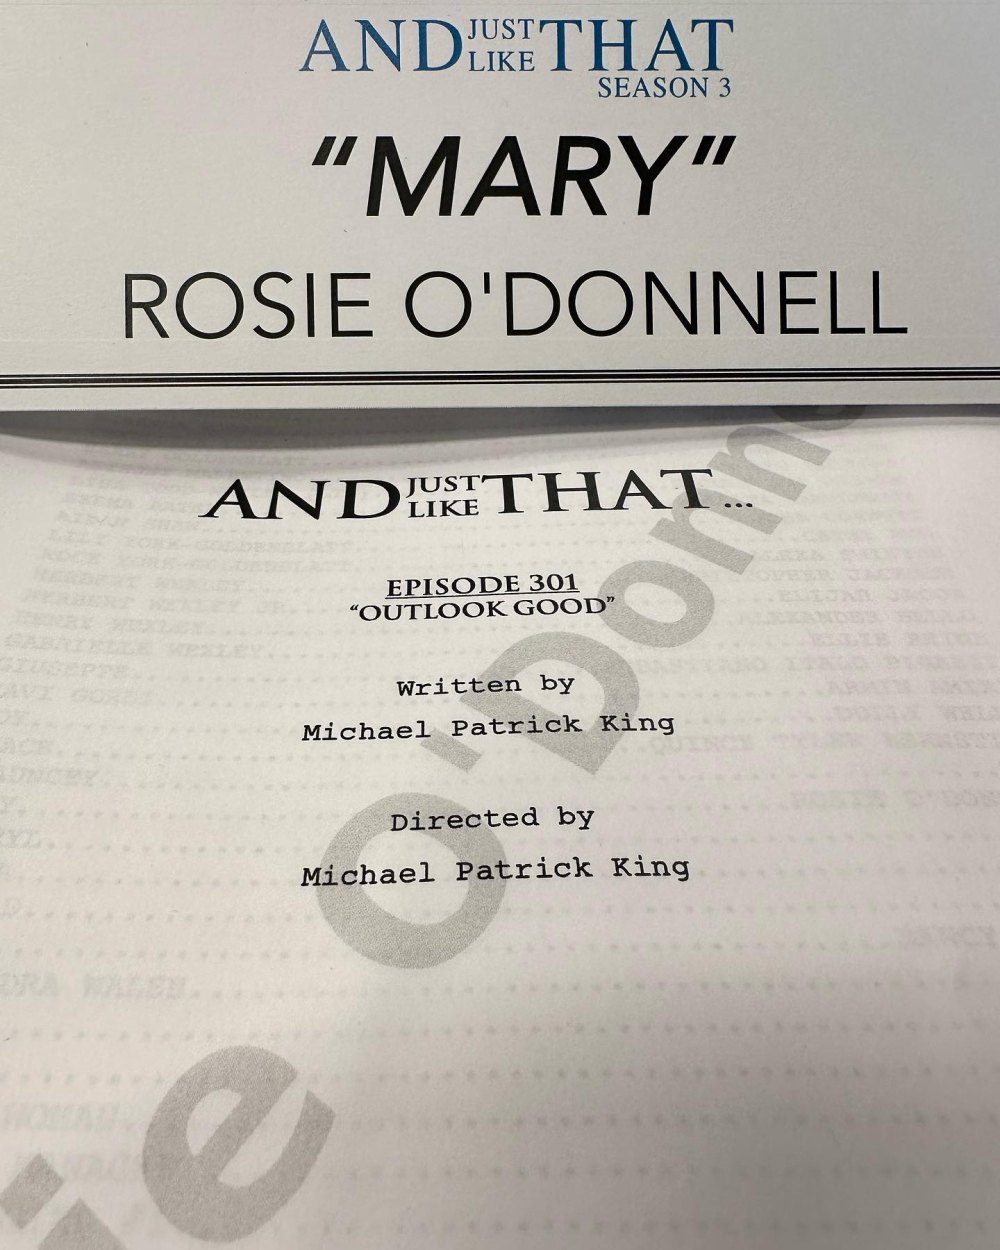 Rosie O Donnell Is Joining And Just Like That for Season 3 Here Comes Mary